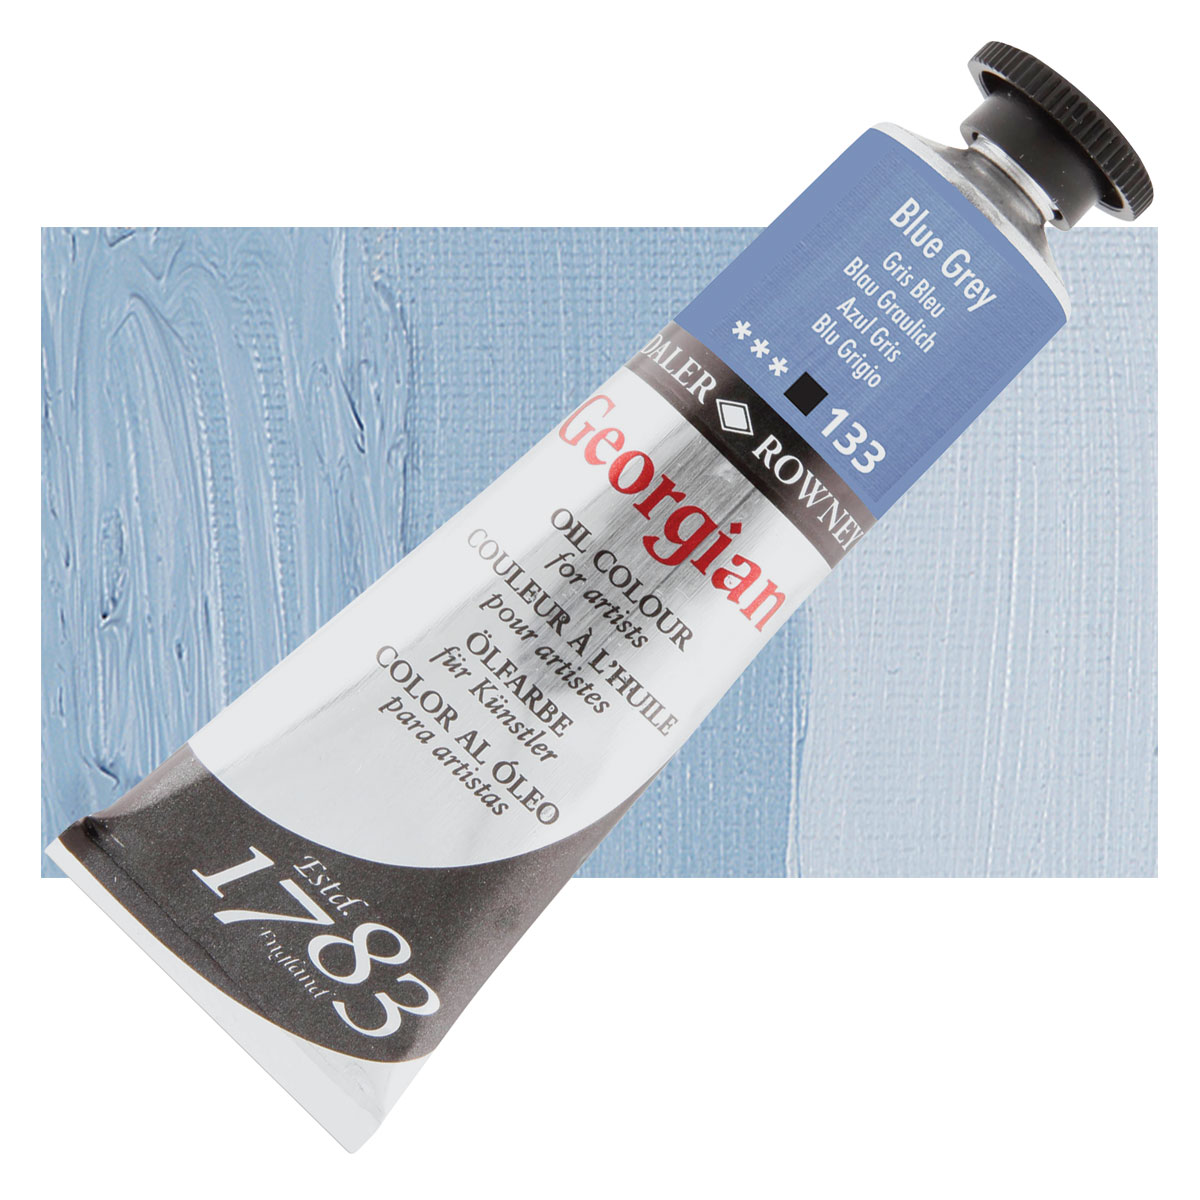  Daler Rowney Georgian Oil Paint Violet Grey 225ml Tube - Art  Paints for Canvas Paper and More - Oil Painting Supplies for Artists and  Students - Artist Oil Paint for Any